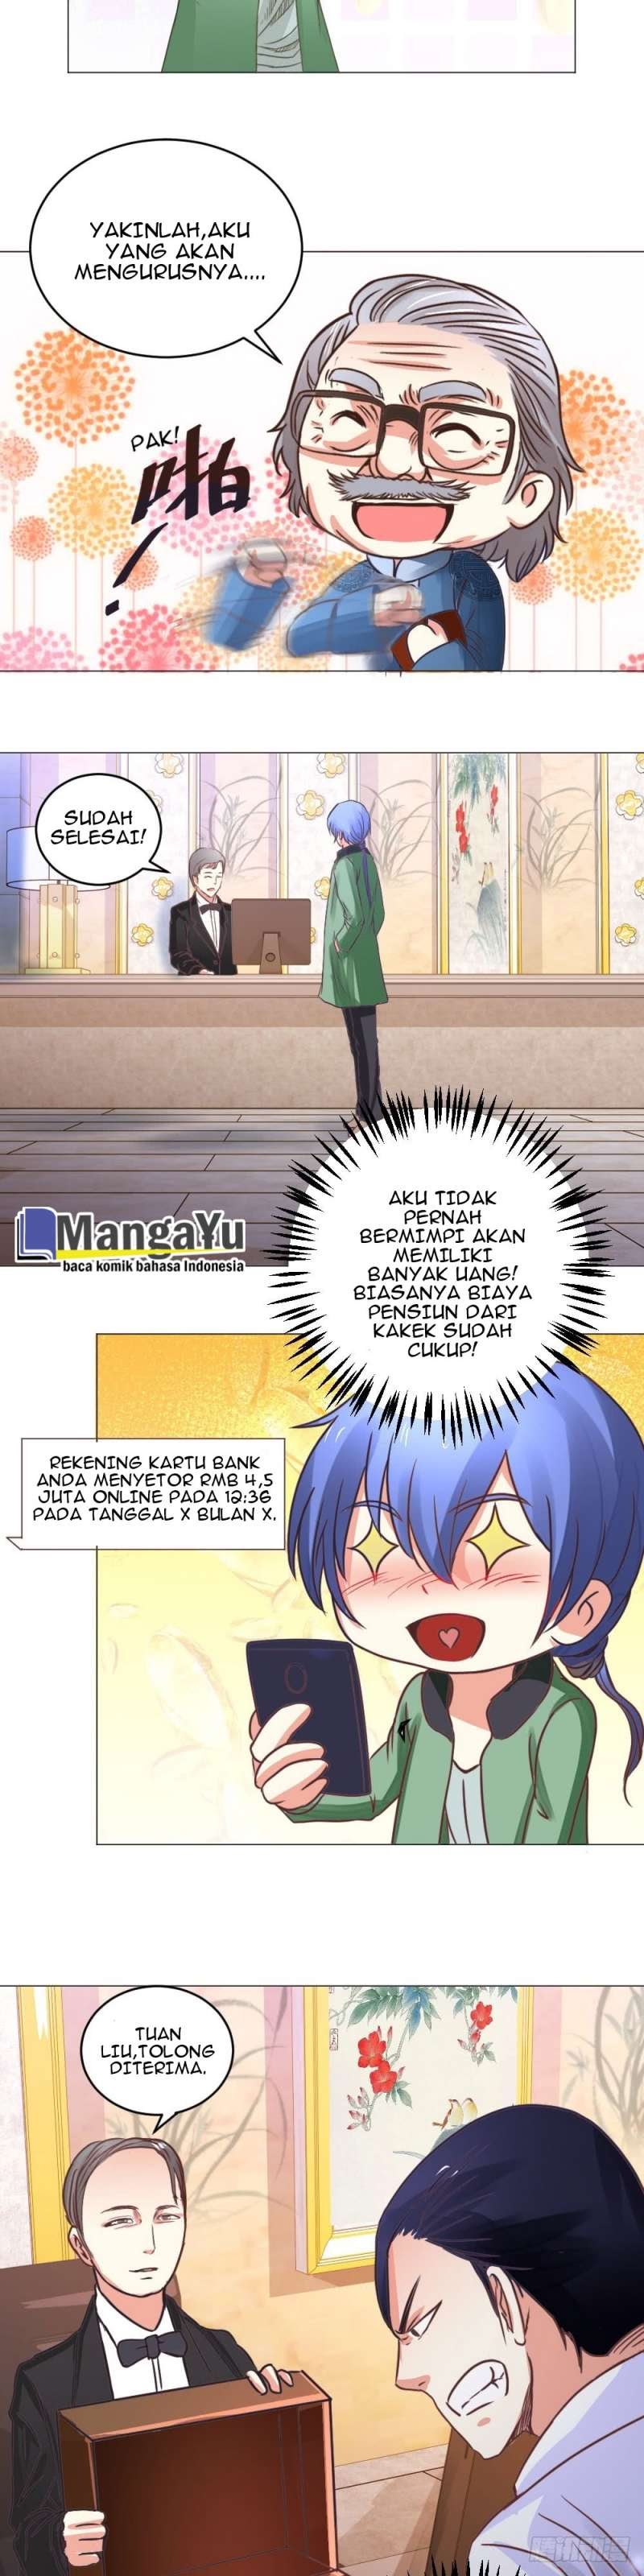 Perspective Medical Saint Chapter 10 10